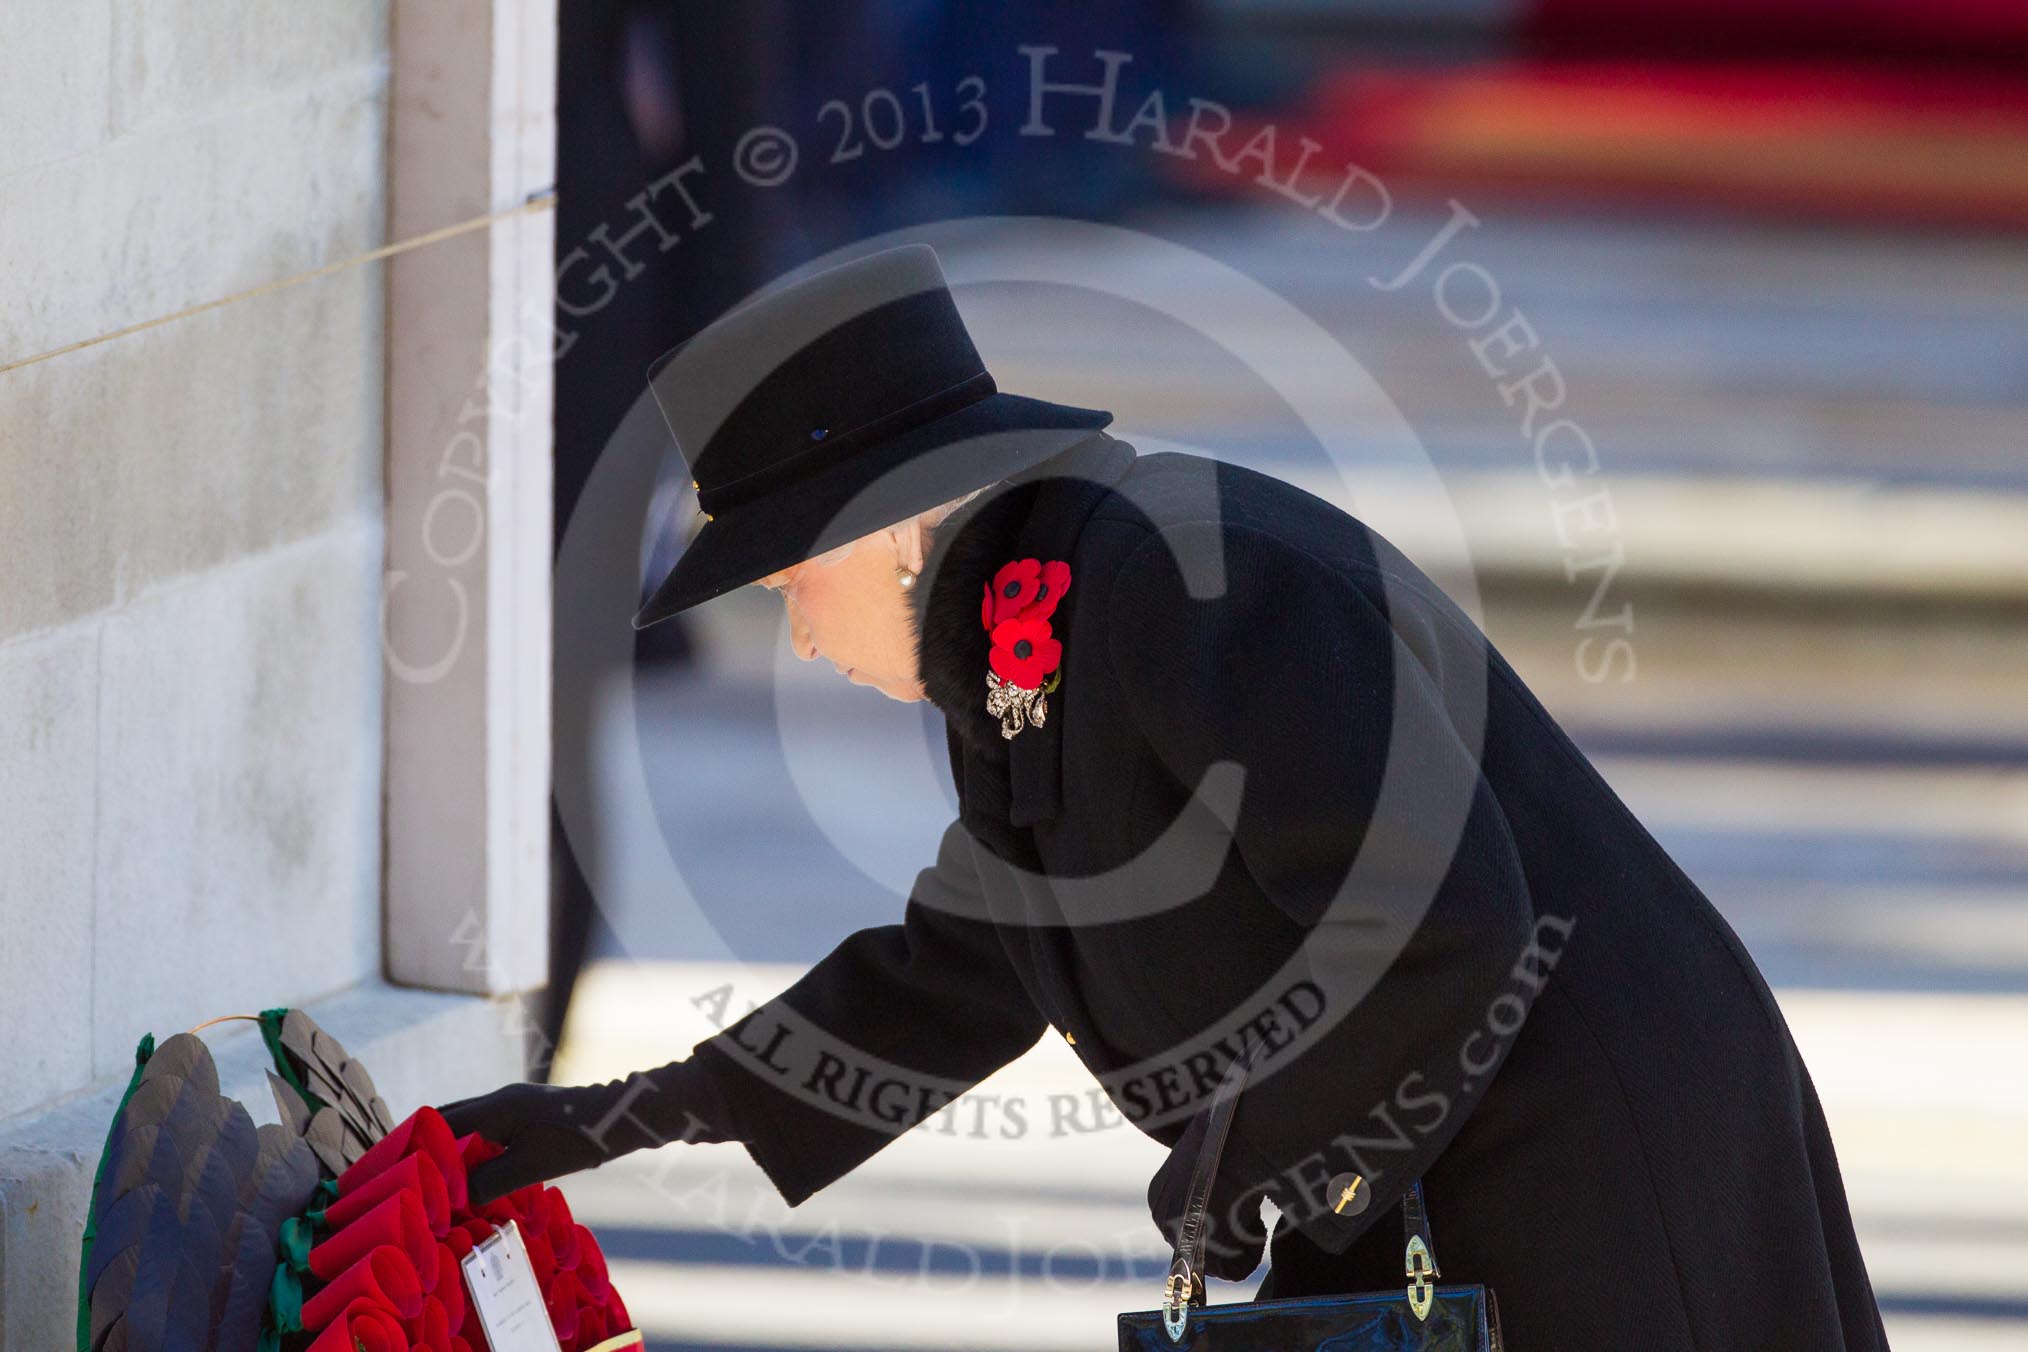 HM The Queen, about to lay her wreaths at the Cenotaph.